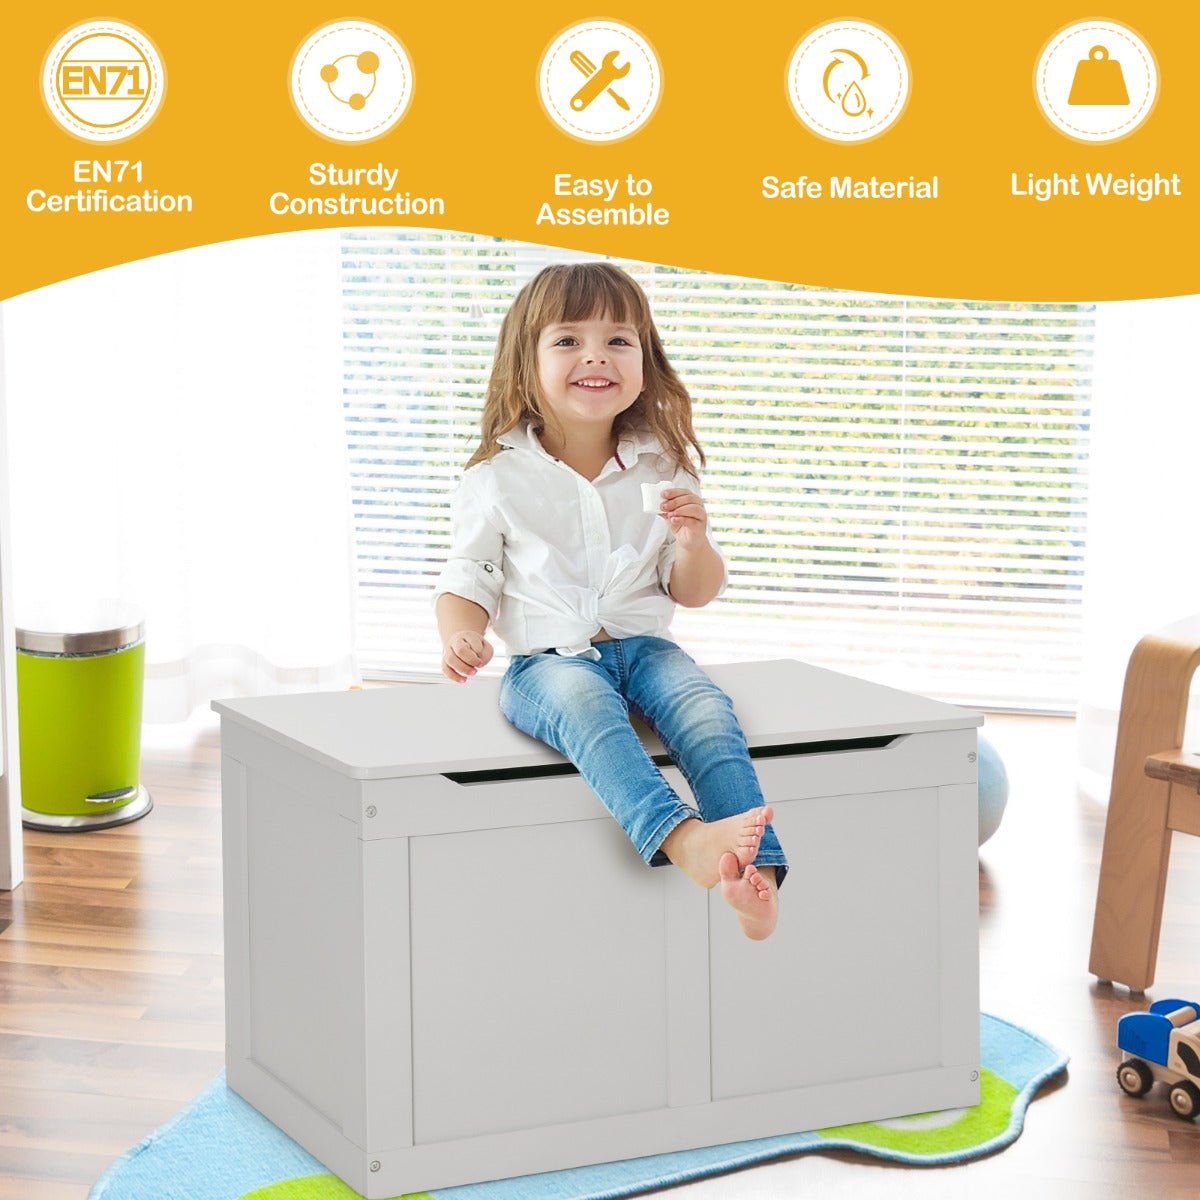 Toy Box Excitement Awaits - Buy Now!